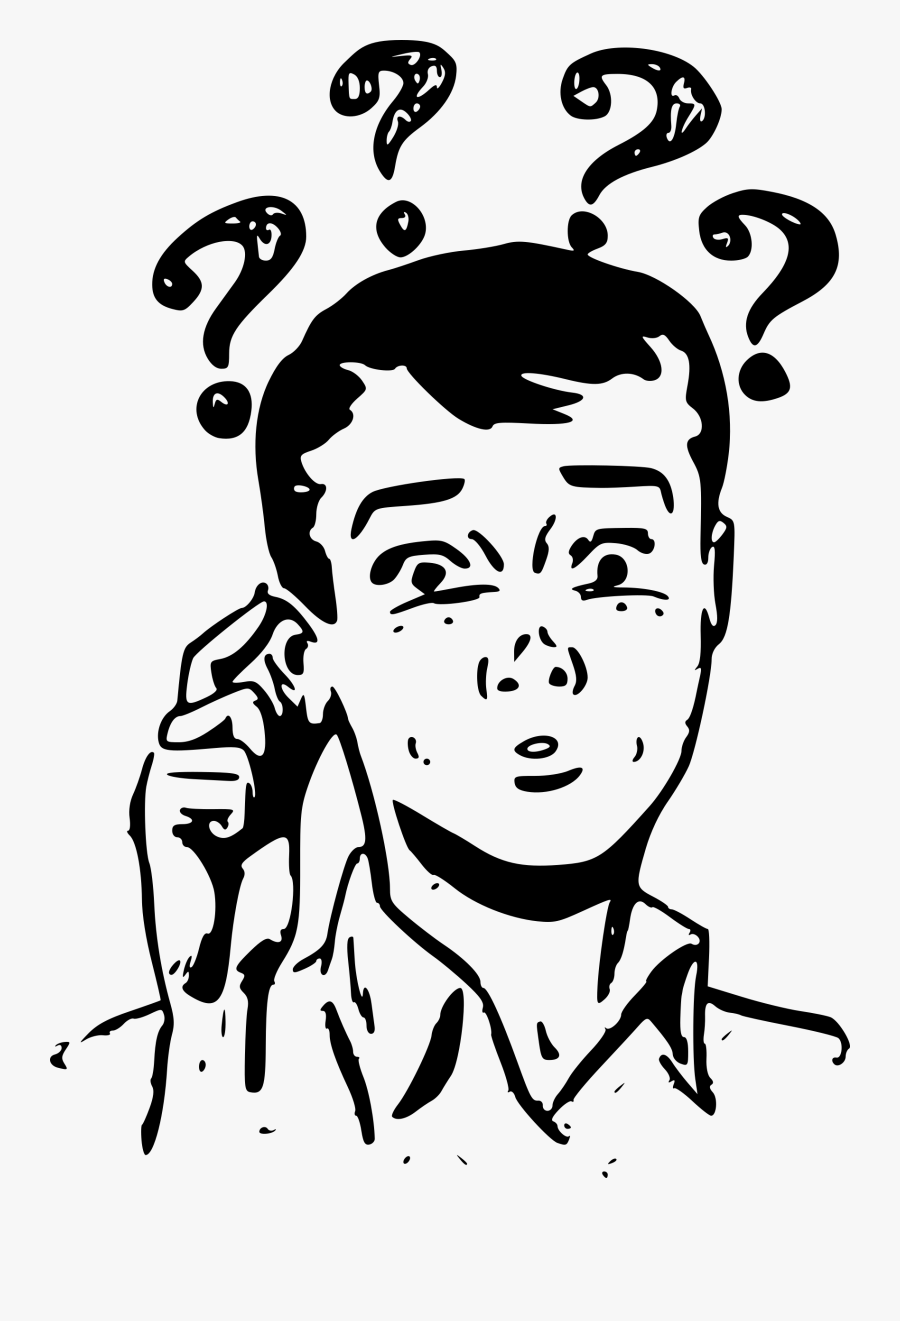 Confused Face Drawing - Confuse Clipart Black And White, Transparent Clipart